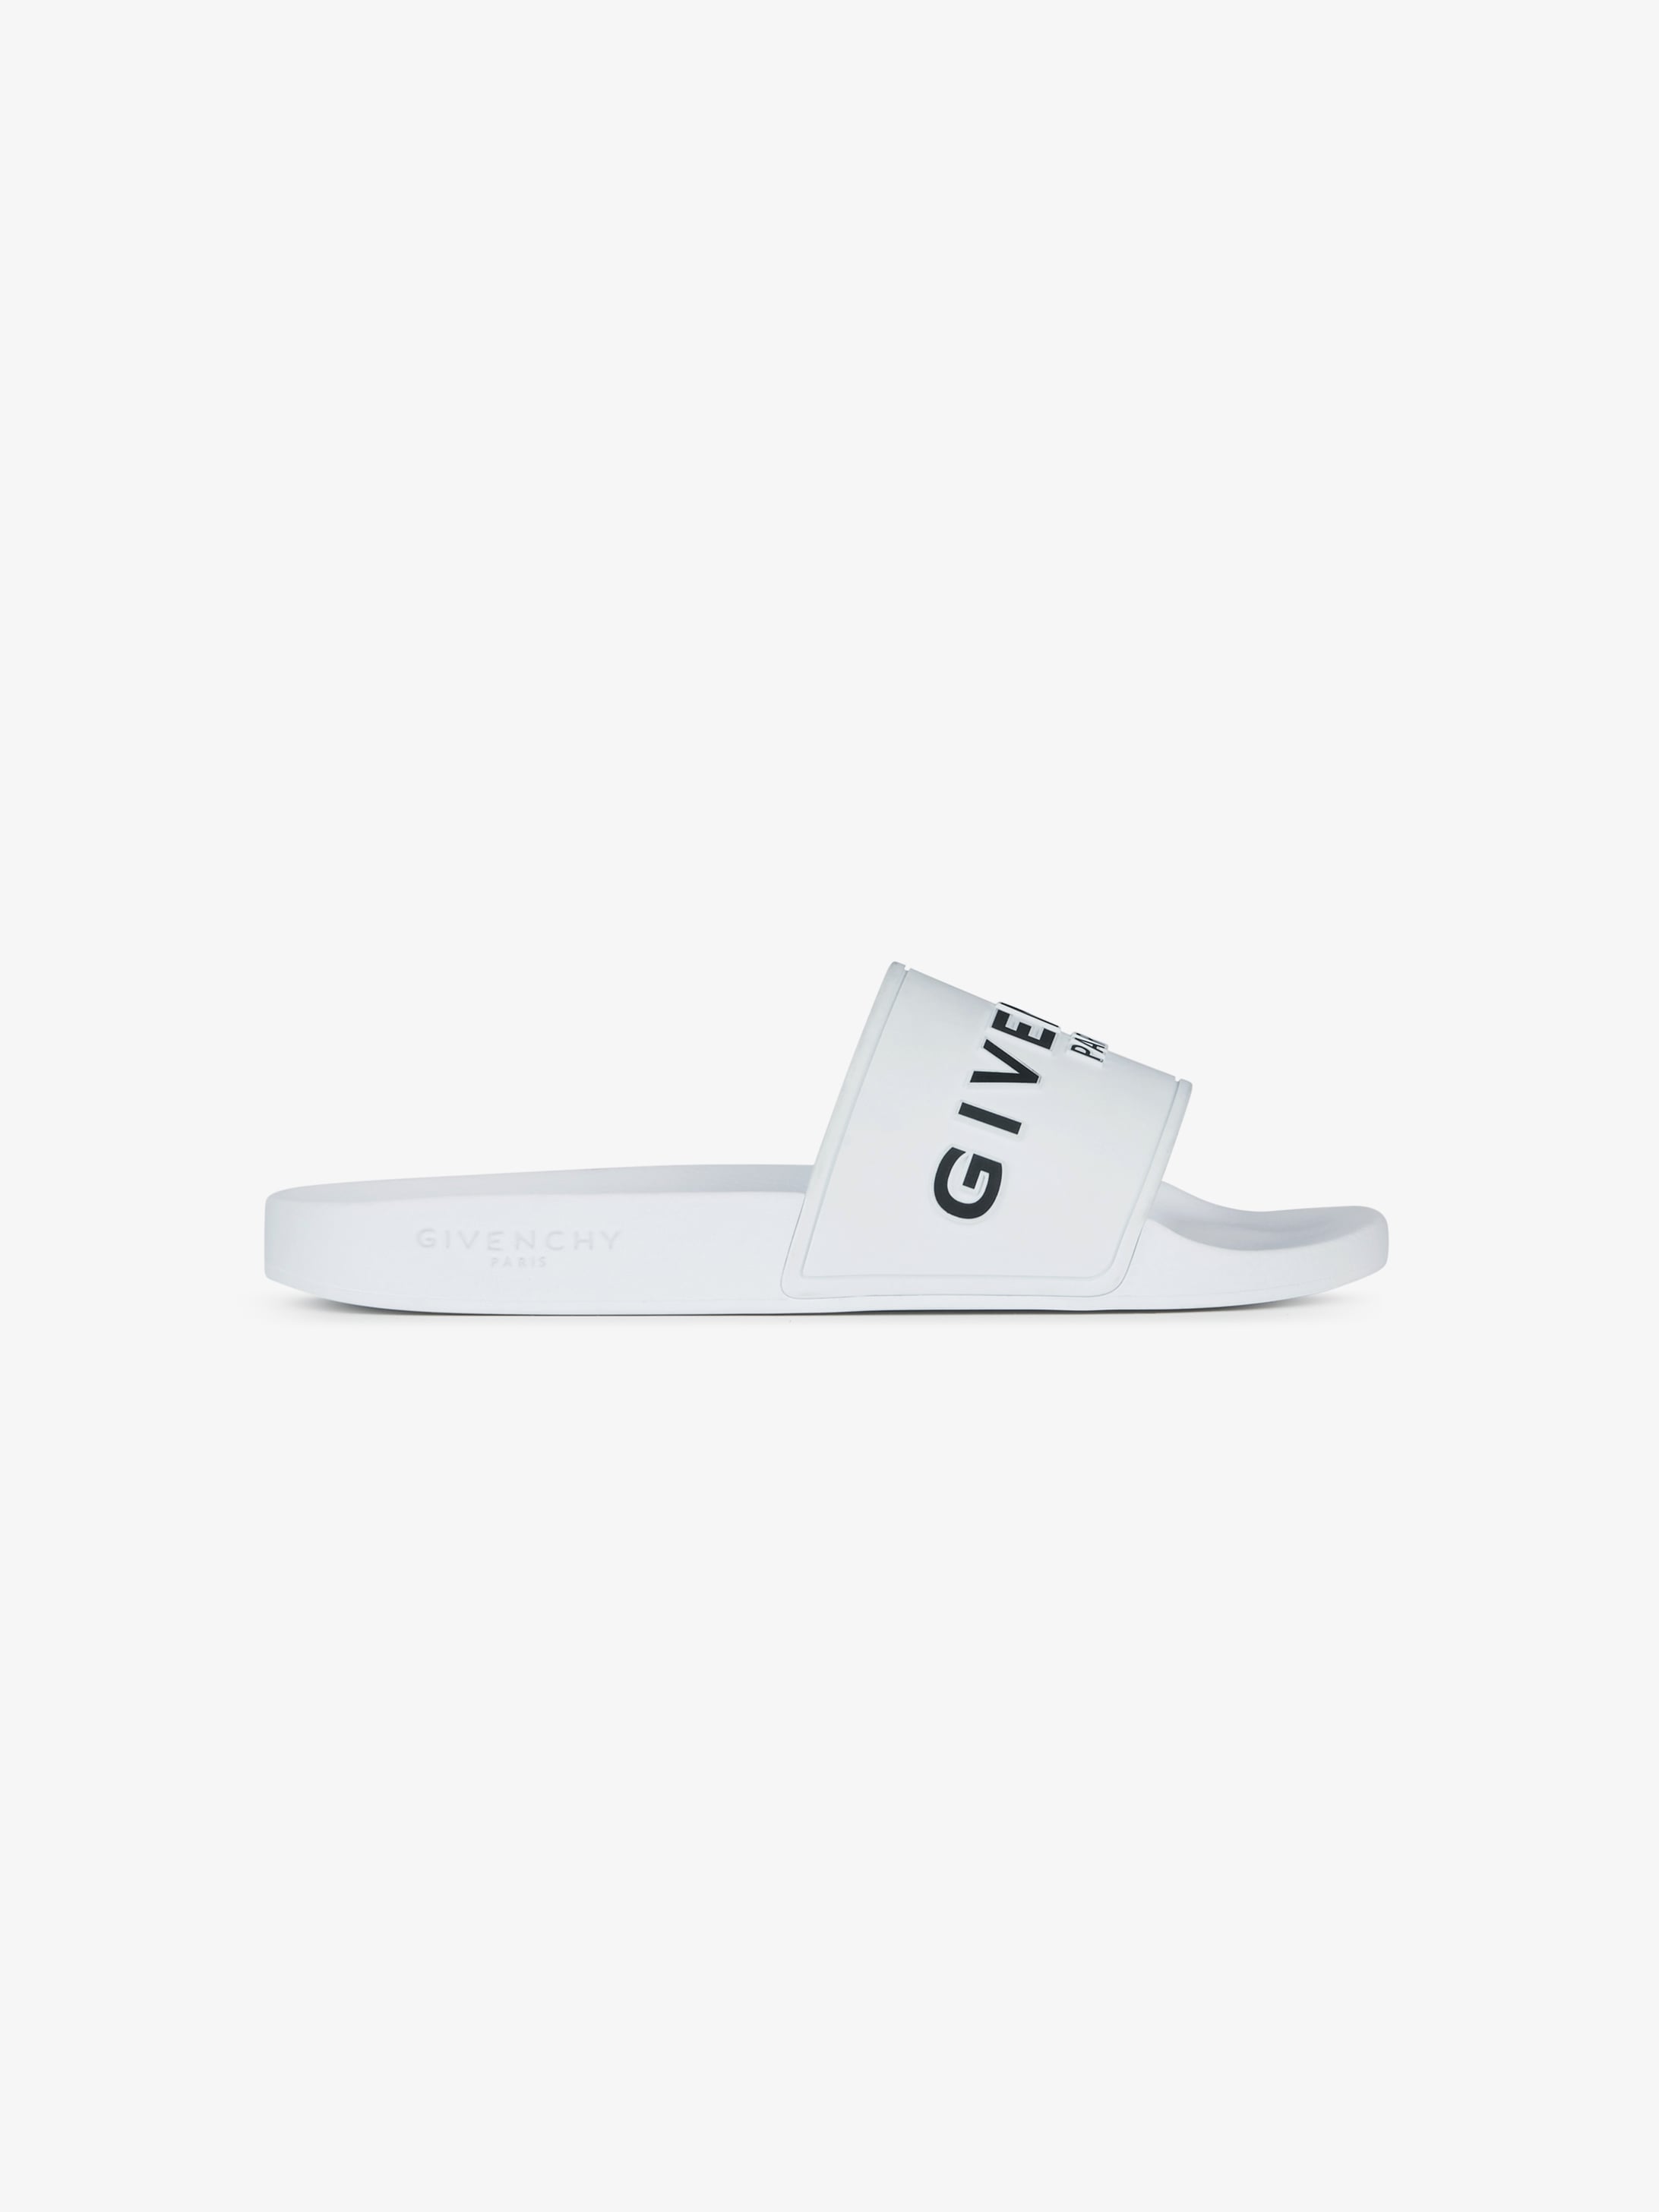 givenchy flat sandals